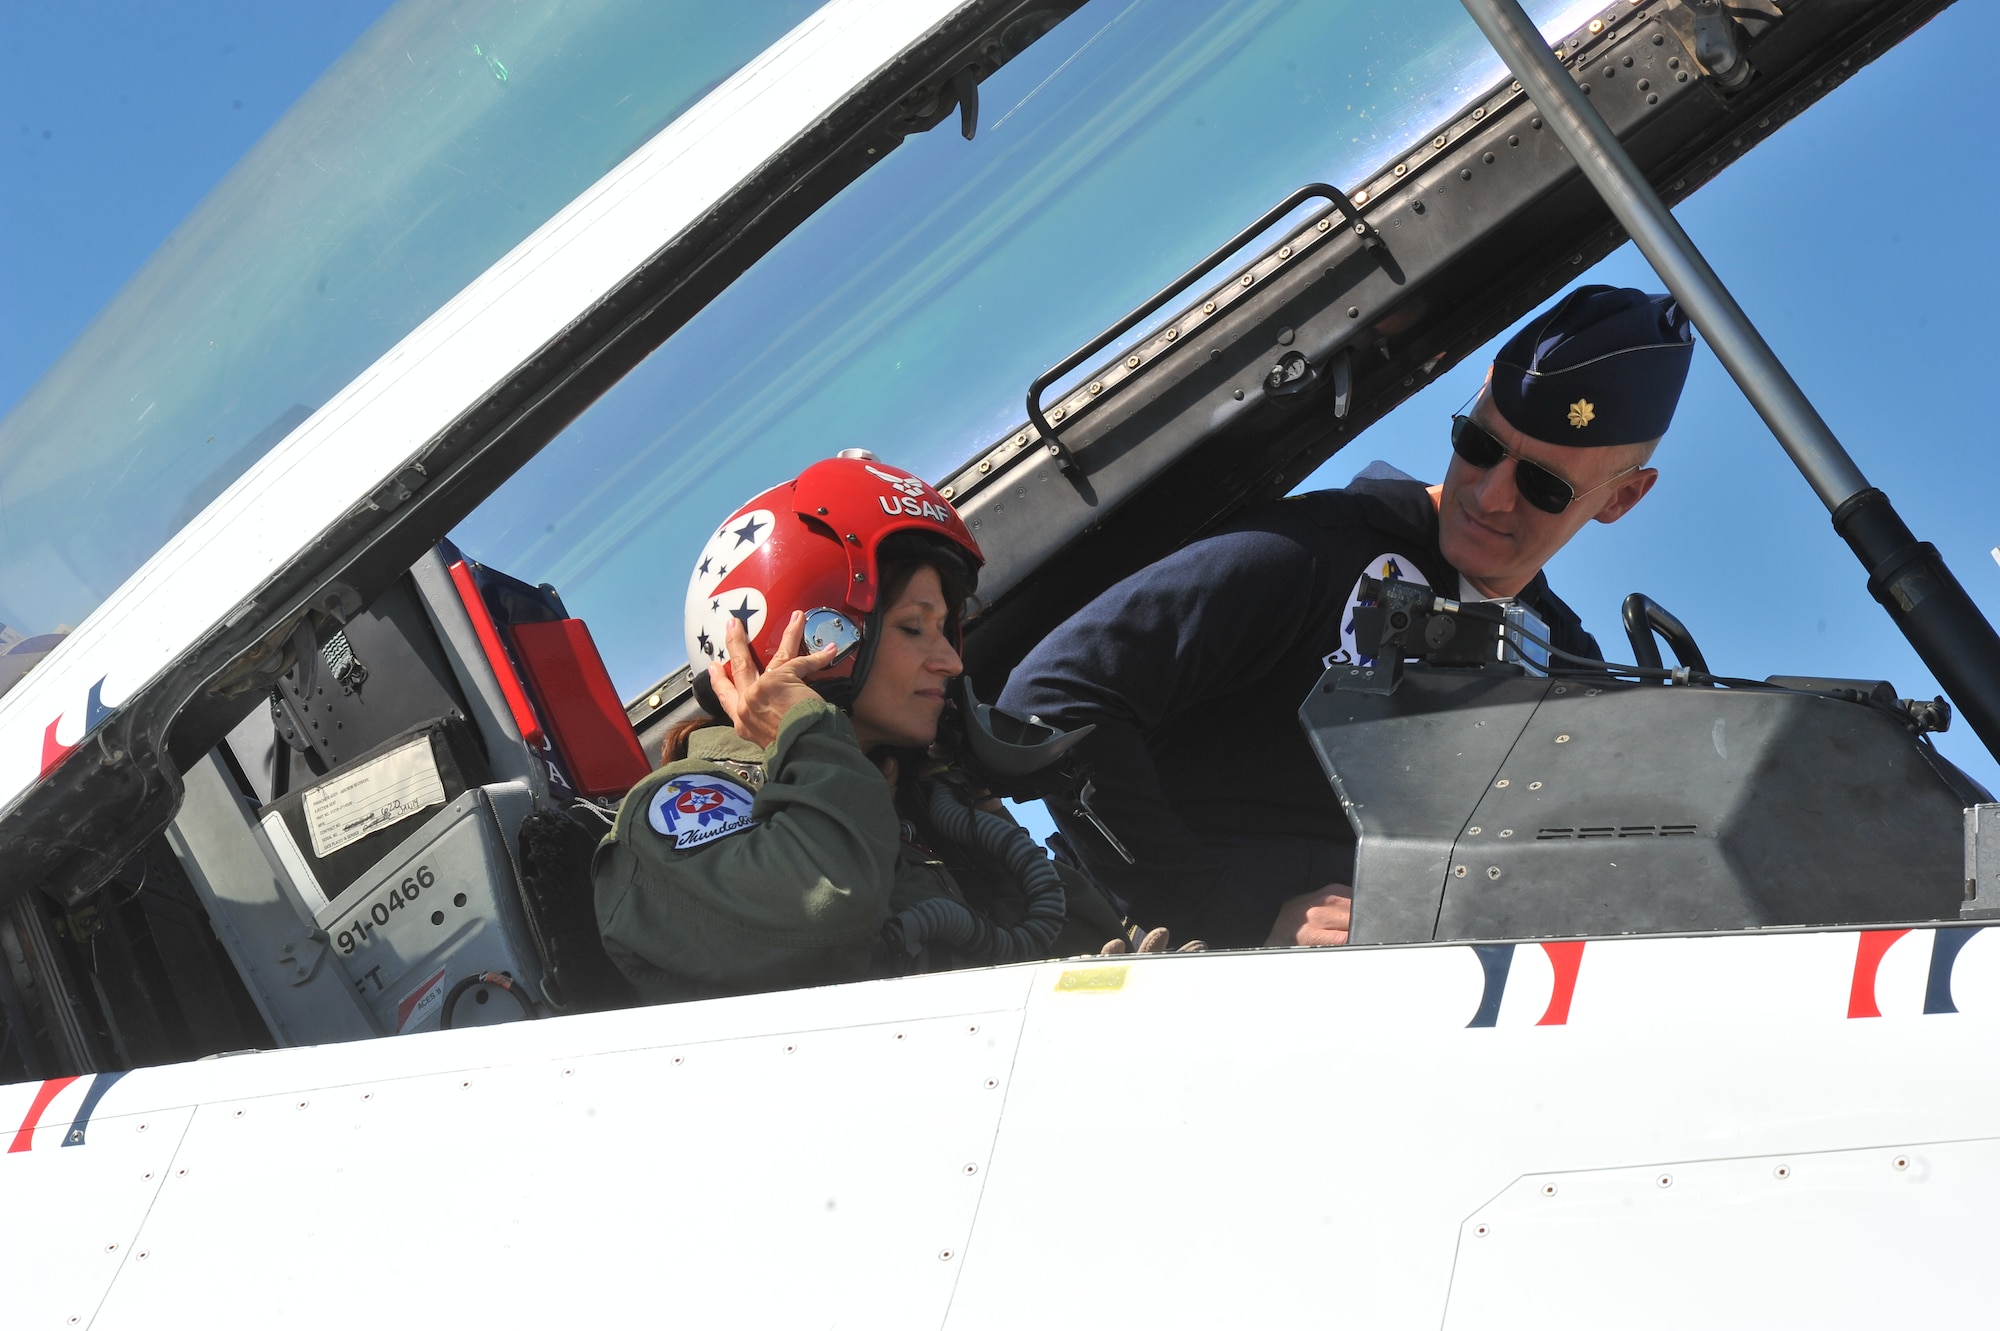 Maj. Michael Fischer, U. S. Air Force Thunderbirds pilot, prepares Robyn Nance, KXLY news anchor, for a ride in the F-16 Fighting Falcon before SkyFest 2014 at Fairchild Air Force Base, Wash., May 30, 2014.  The Thunderbirds have flown the F-16 Fighting Falcon since August 1982, more than half of the team's history. SkyFest is Fairchild’s air show and open house, giving the local and regional community the opportunity to view Airmen and our resources. (U.S. Air Force photo by Staff Sgt. Veronica Montes)